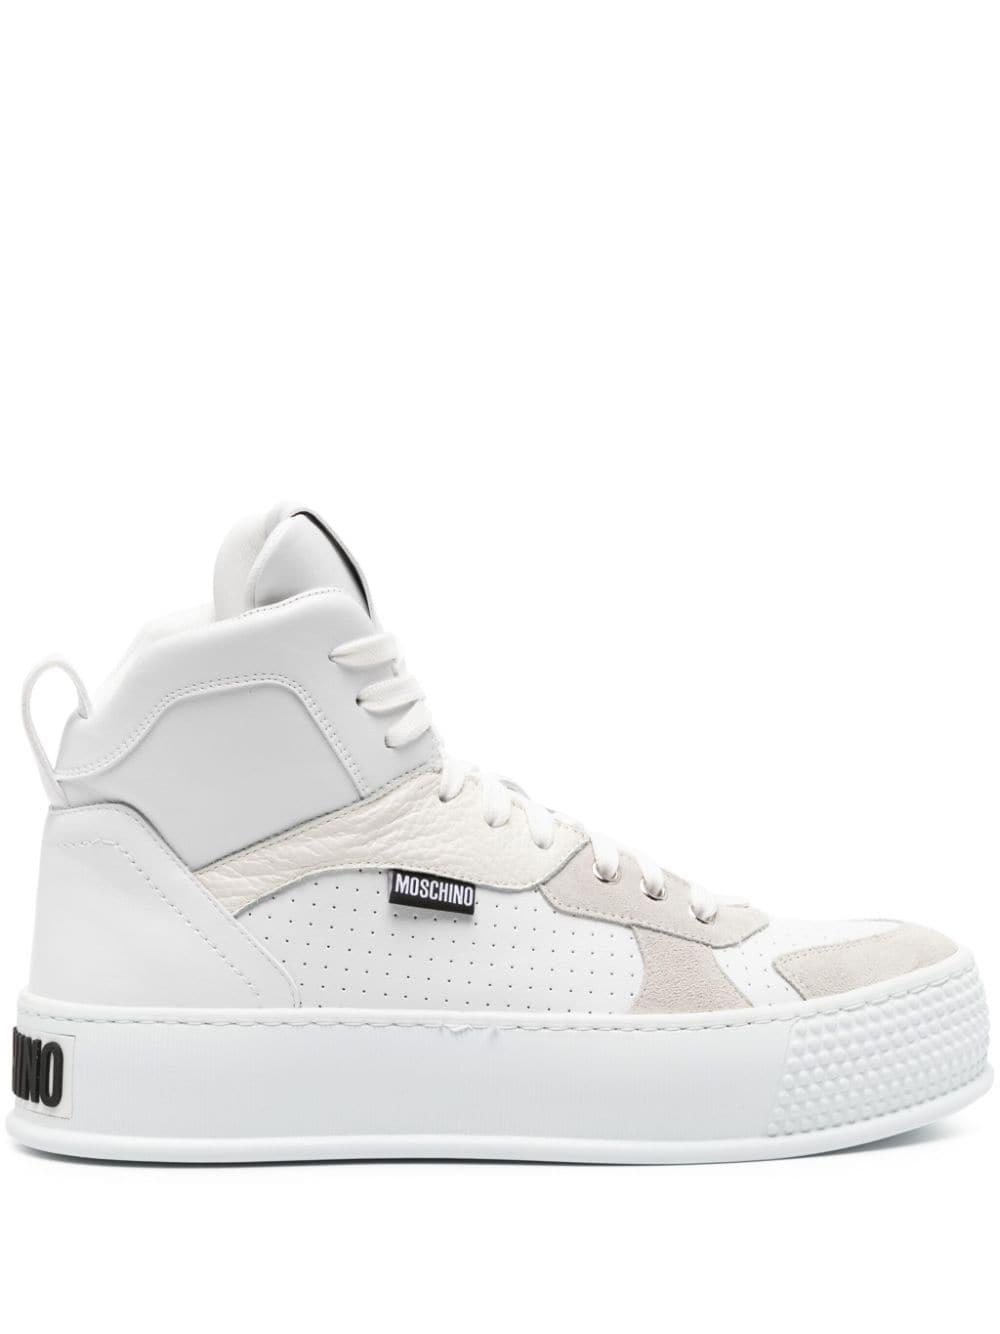 Moschino Bumps & Stripes High-top Trainers In White